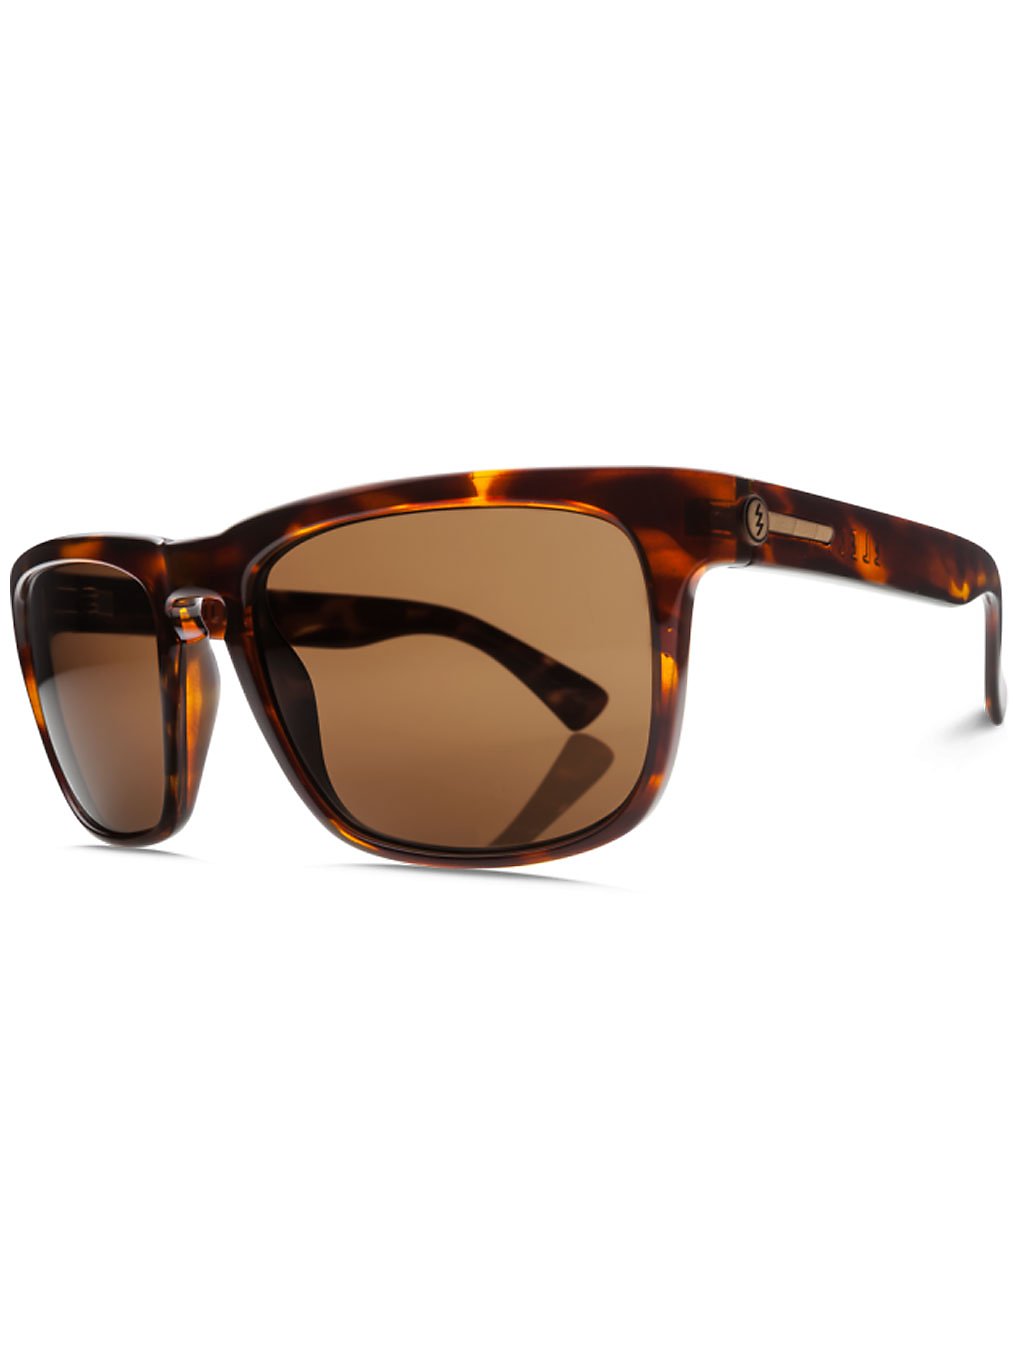 Electric Knoxville Tortoise Shell OHM polarized bronze